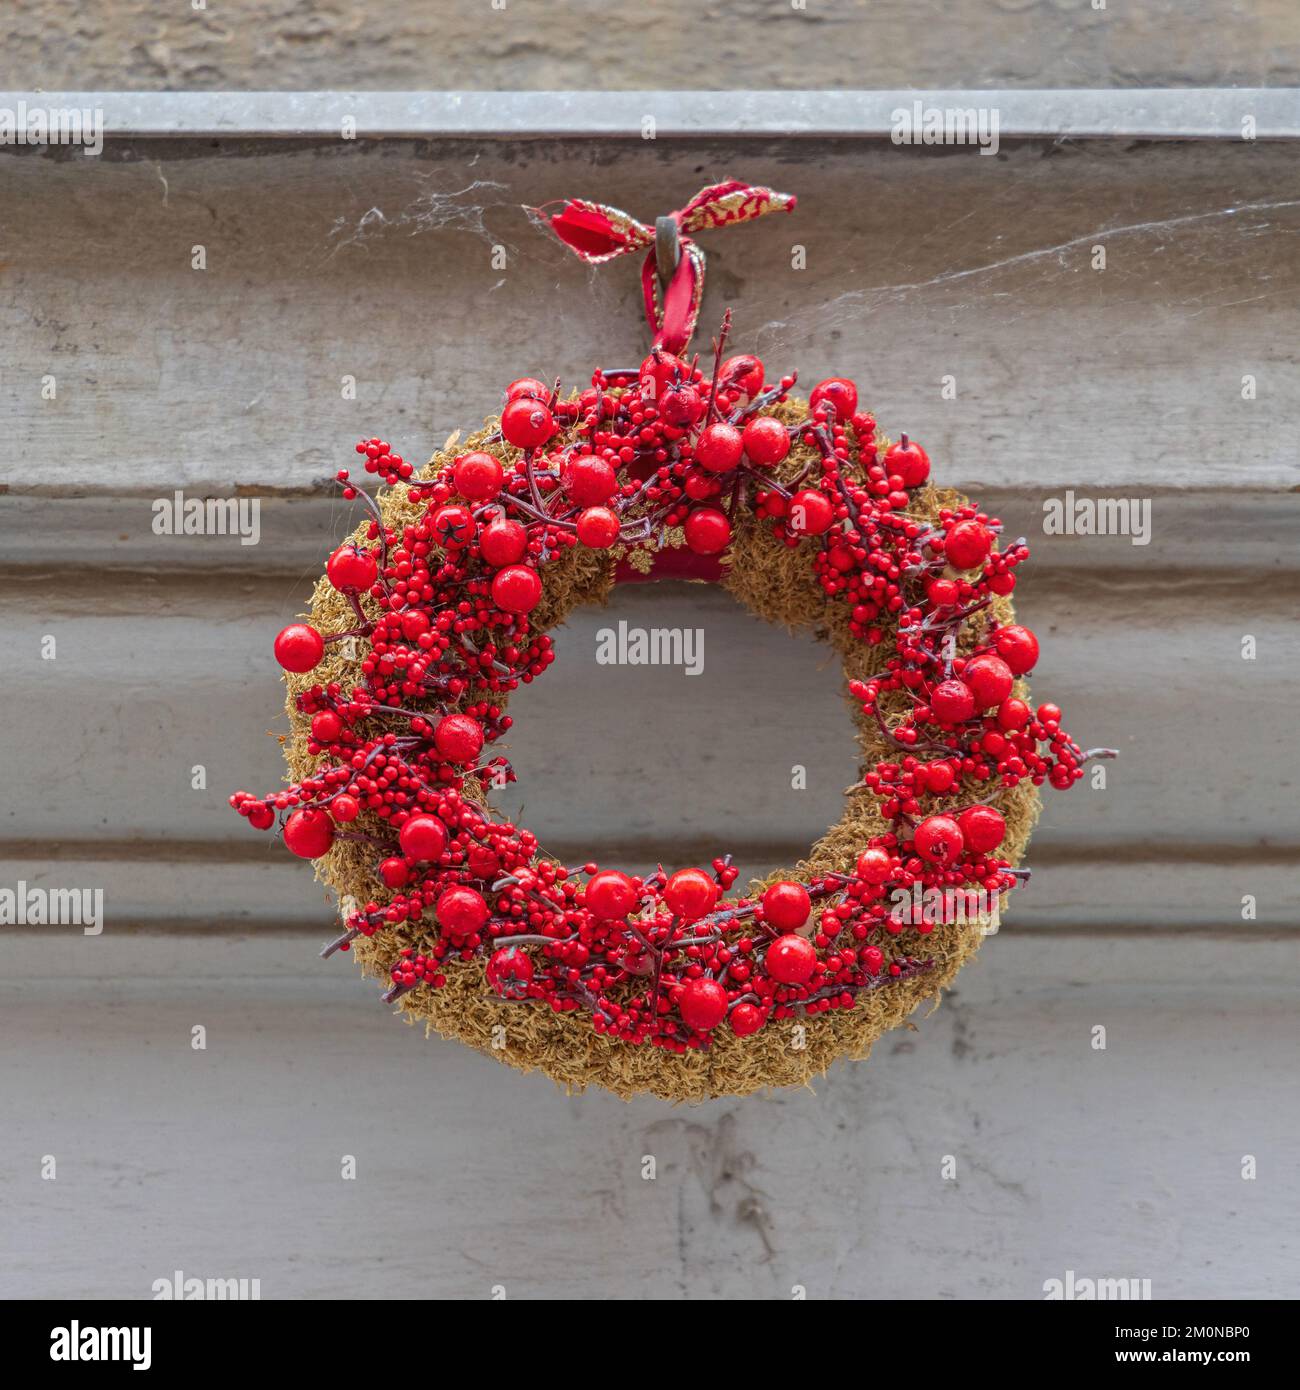 Decorative Red Berry Wreath Hanging at Building Wall Stock Photo